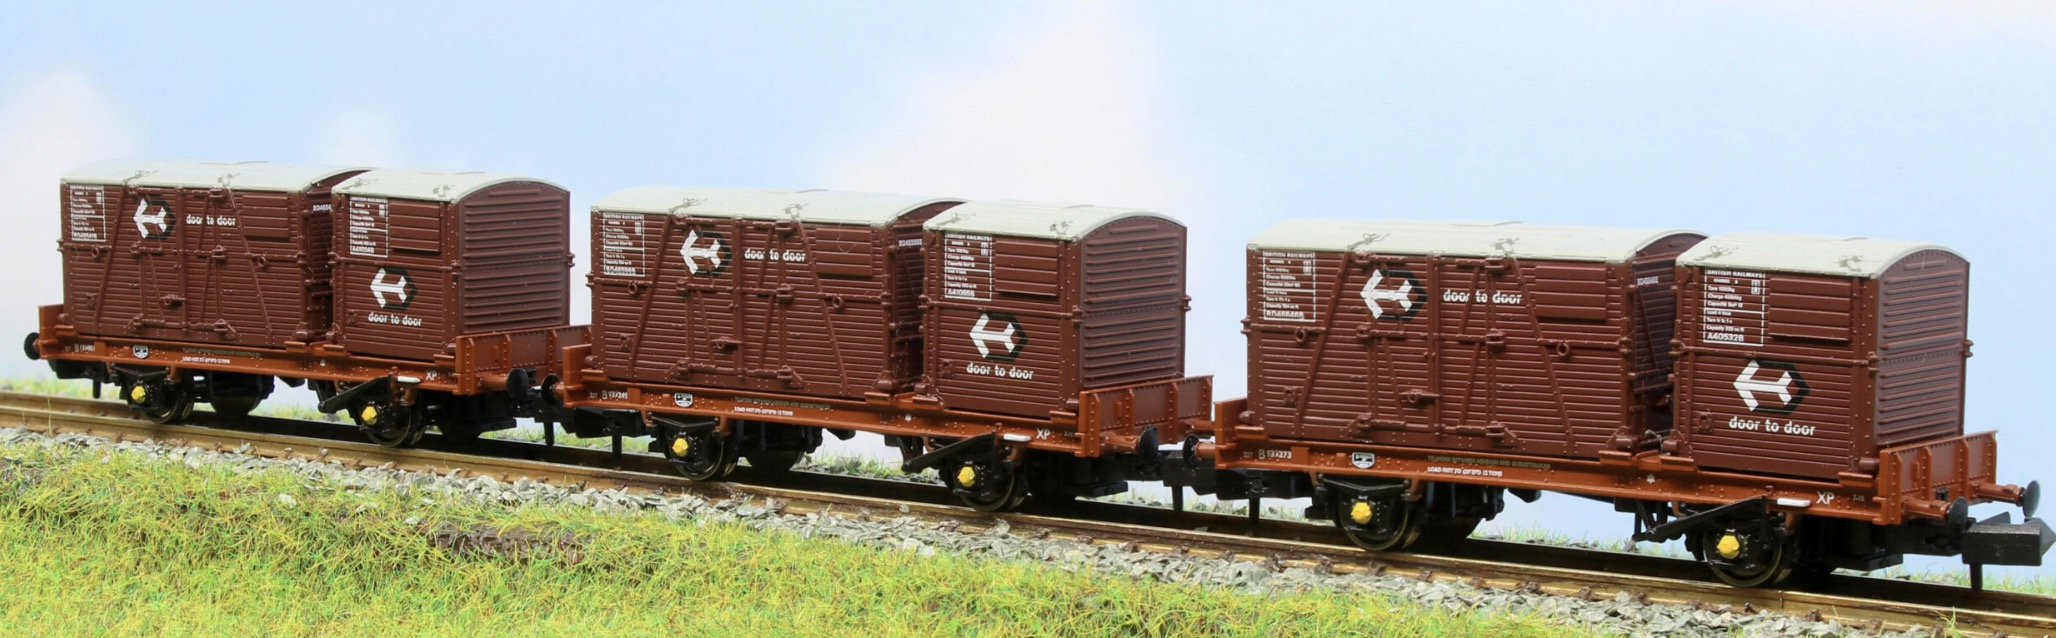 N Scale - Rapido Trains UK - 921017 - Flat Wagon, Container, Conflat 